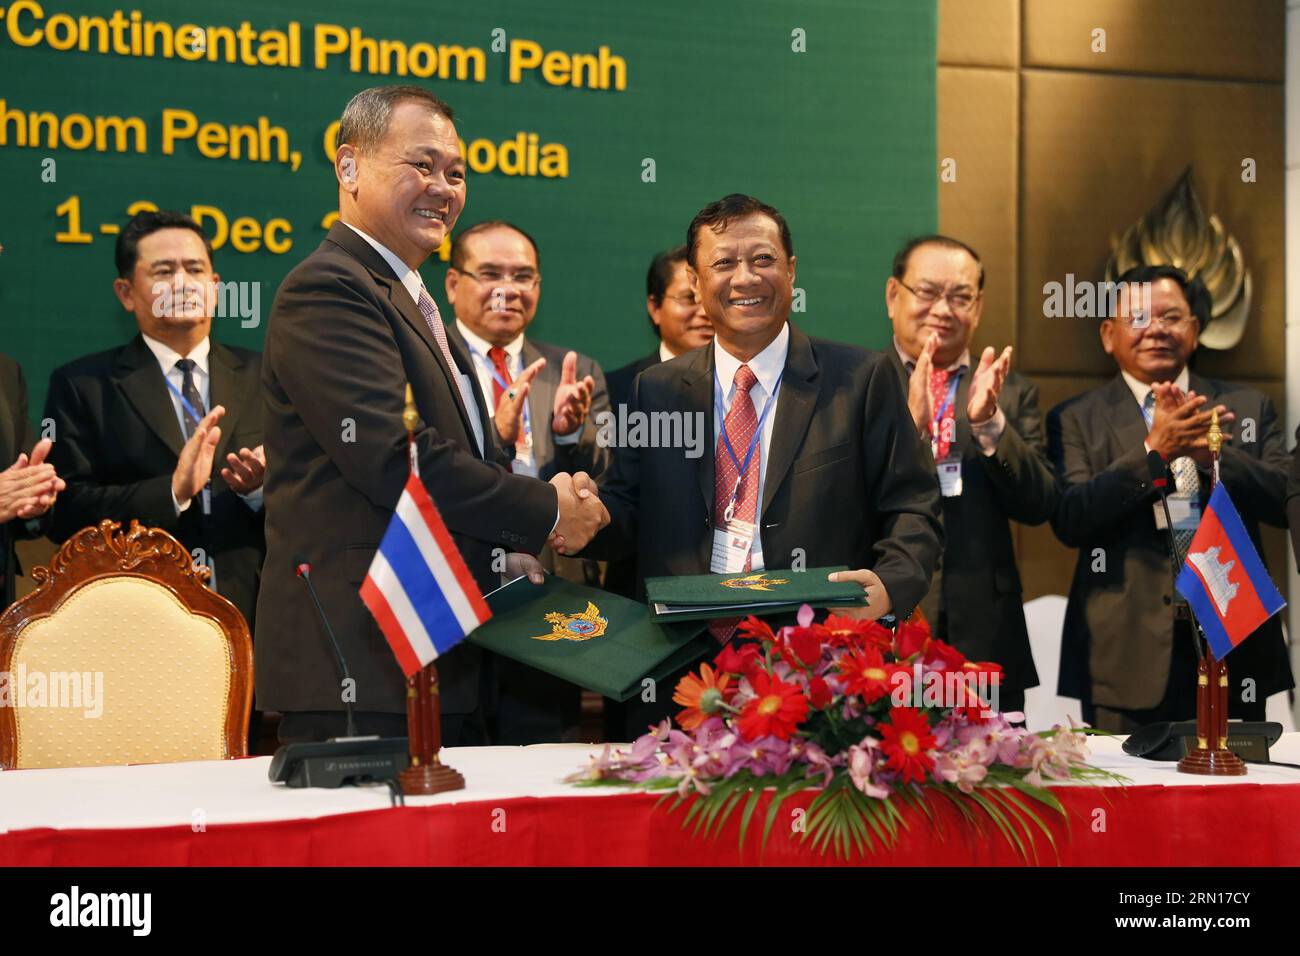 (141203) -- PHNOM PENH, Dec. 3, 2014 -- Secretary of State of Cambodia s defense ministry, Gen. Neang Phat (R front) shakes hands with Lt. Gen. Boonchu Kird-chok, director of the Royal Thai Armed Forces Headquarters border committee, during the signing ceremony in Phnom Penh, Cambodia, Dec. 3, 2014. Cambodian and Thai defense officials on Wednesday vowed to further enhance cooperation along the border for mutual benefits, according to a joint statement released after a two-day meeting. )(azp) CAMBODIA-PHNOM PENH-COOPERATION-DEFENCE Phearum PUBLICATIONxNOTxINxCHN   Phnom Penh DEC 3 2014 Secreta Stock Photo